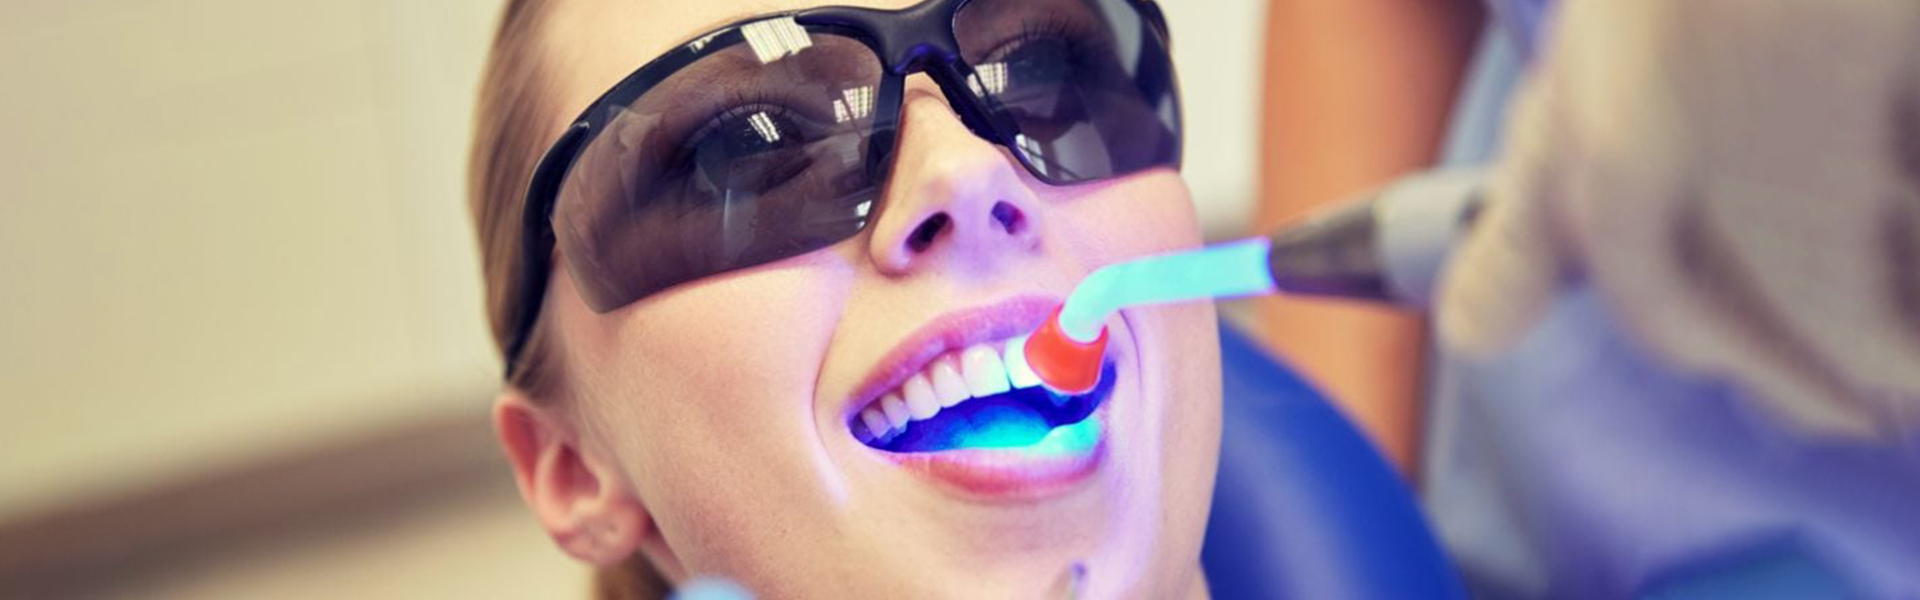 What Happens If You Wait Too Long to Get a Dental Filling?